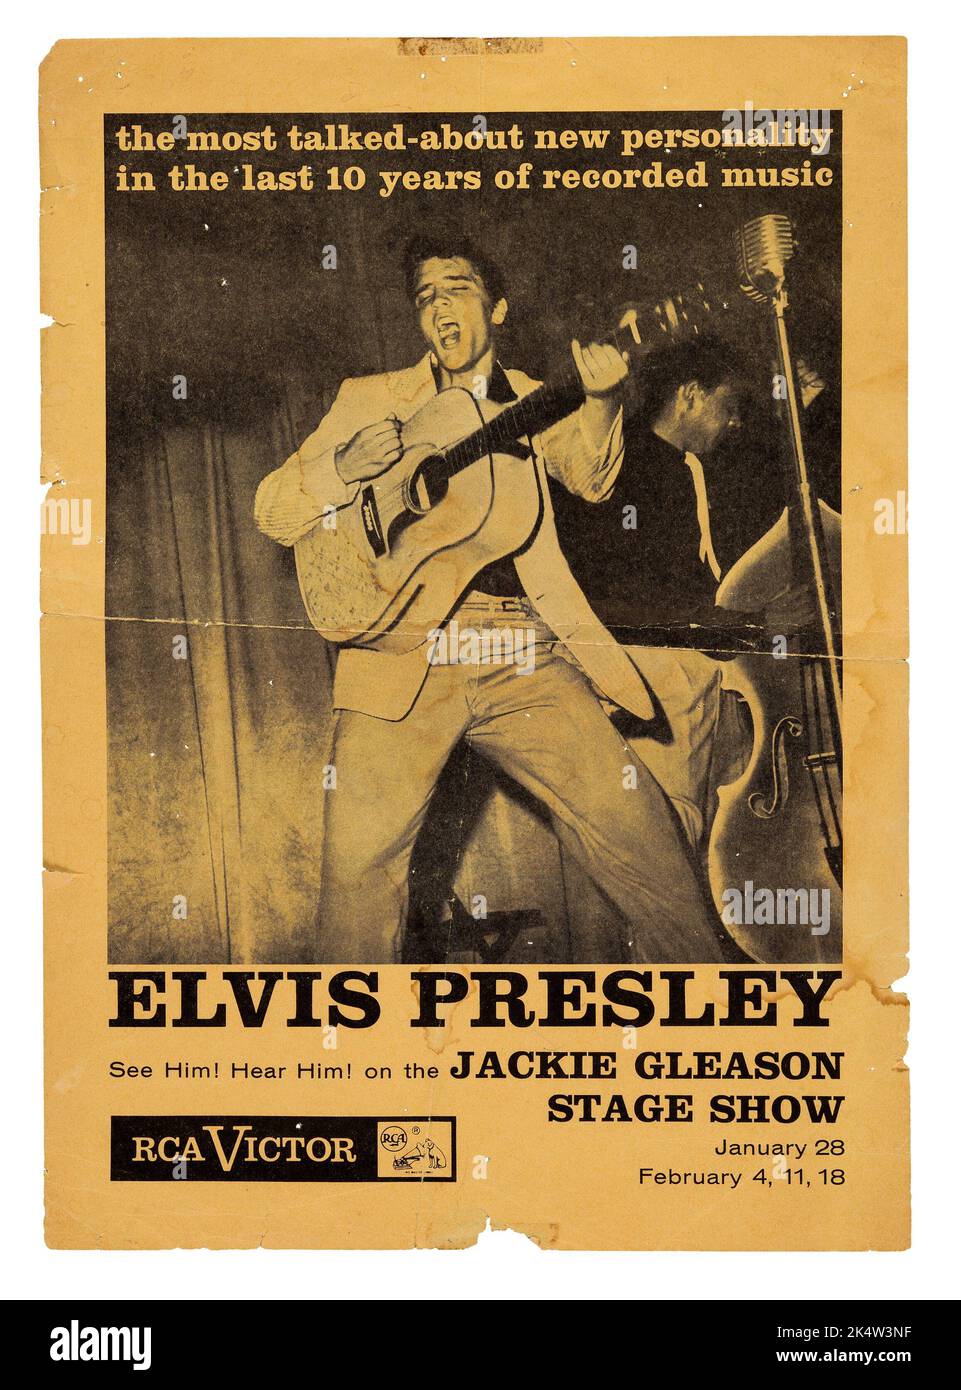 Elvis Presley January 1956 RCA Promotional Handbill for Very First Television Appearance. Jackie Gleason Stage Show. Stock Photo